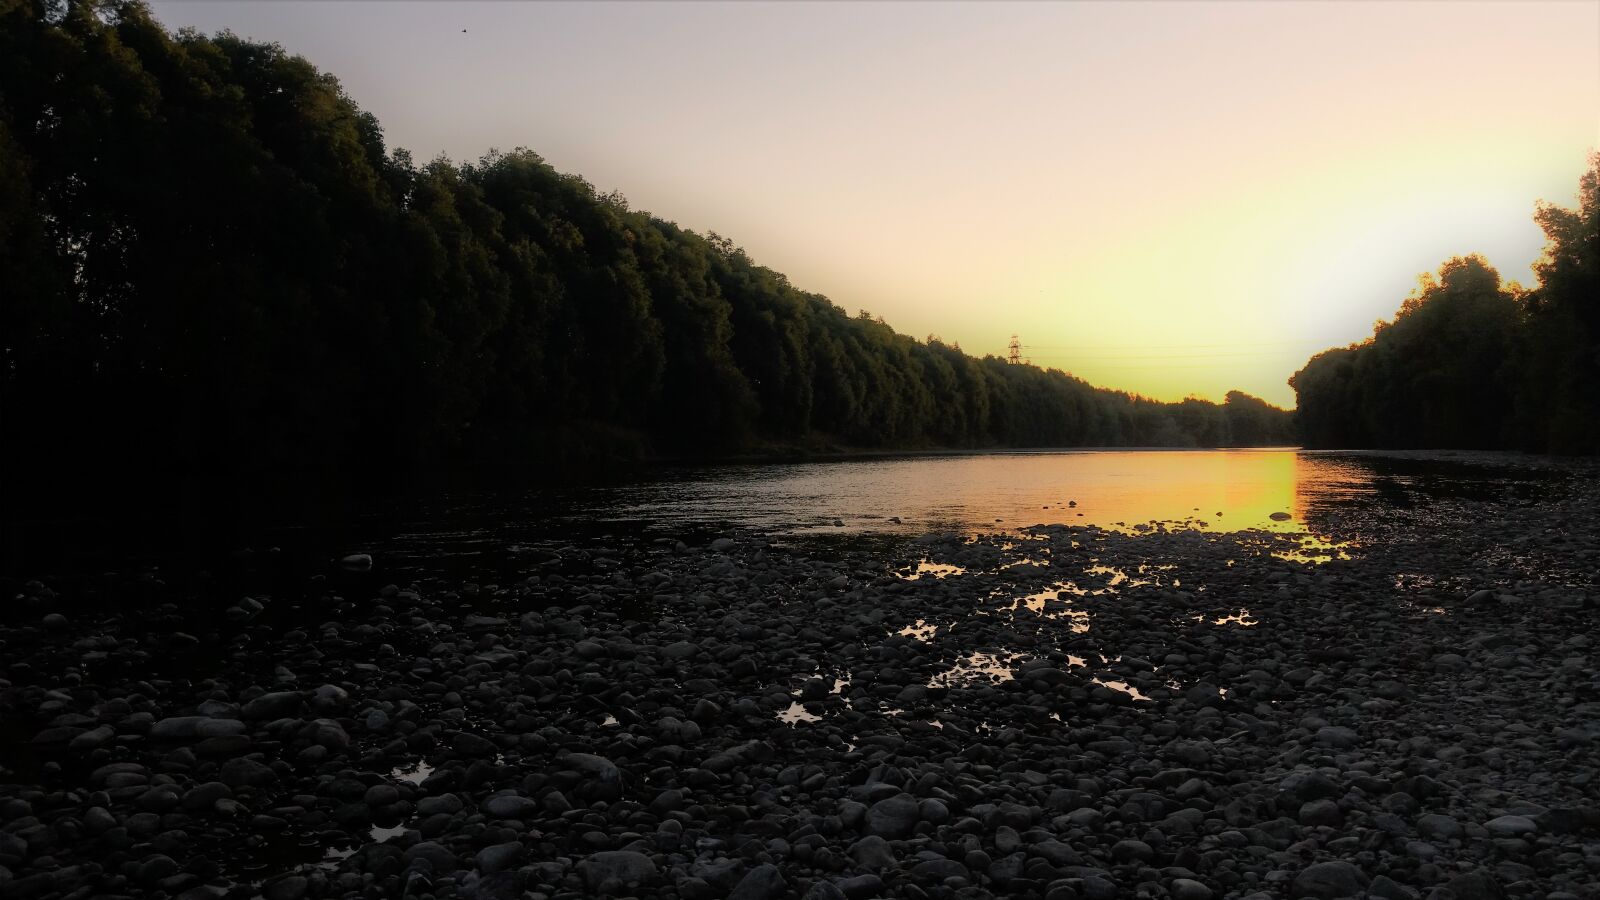 Samsung Galaxy S5 sample photo. Gold, river, stones, sunset photography